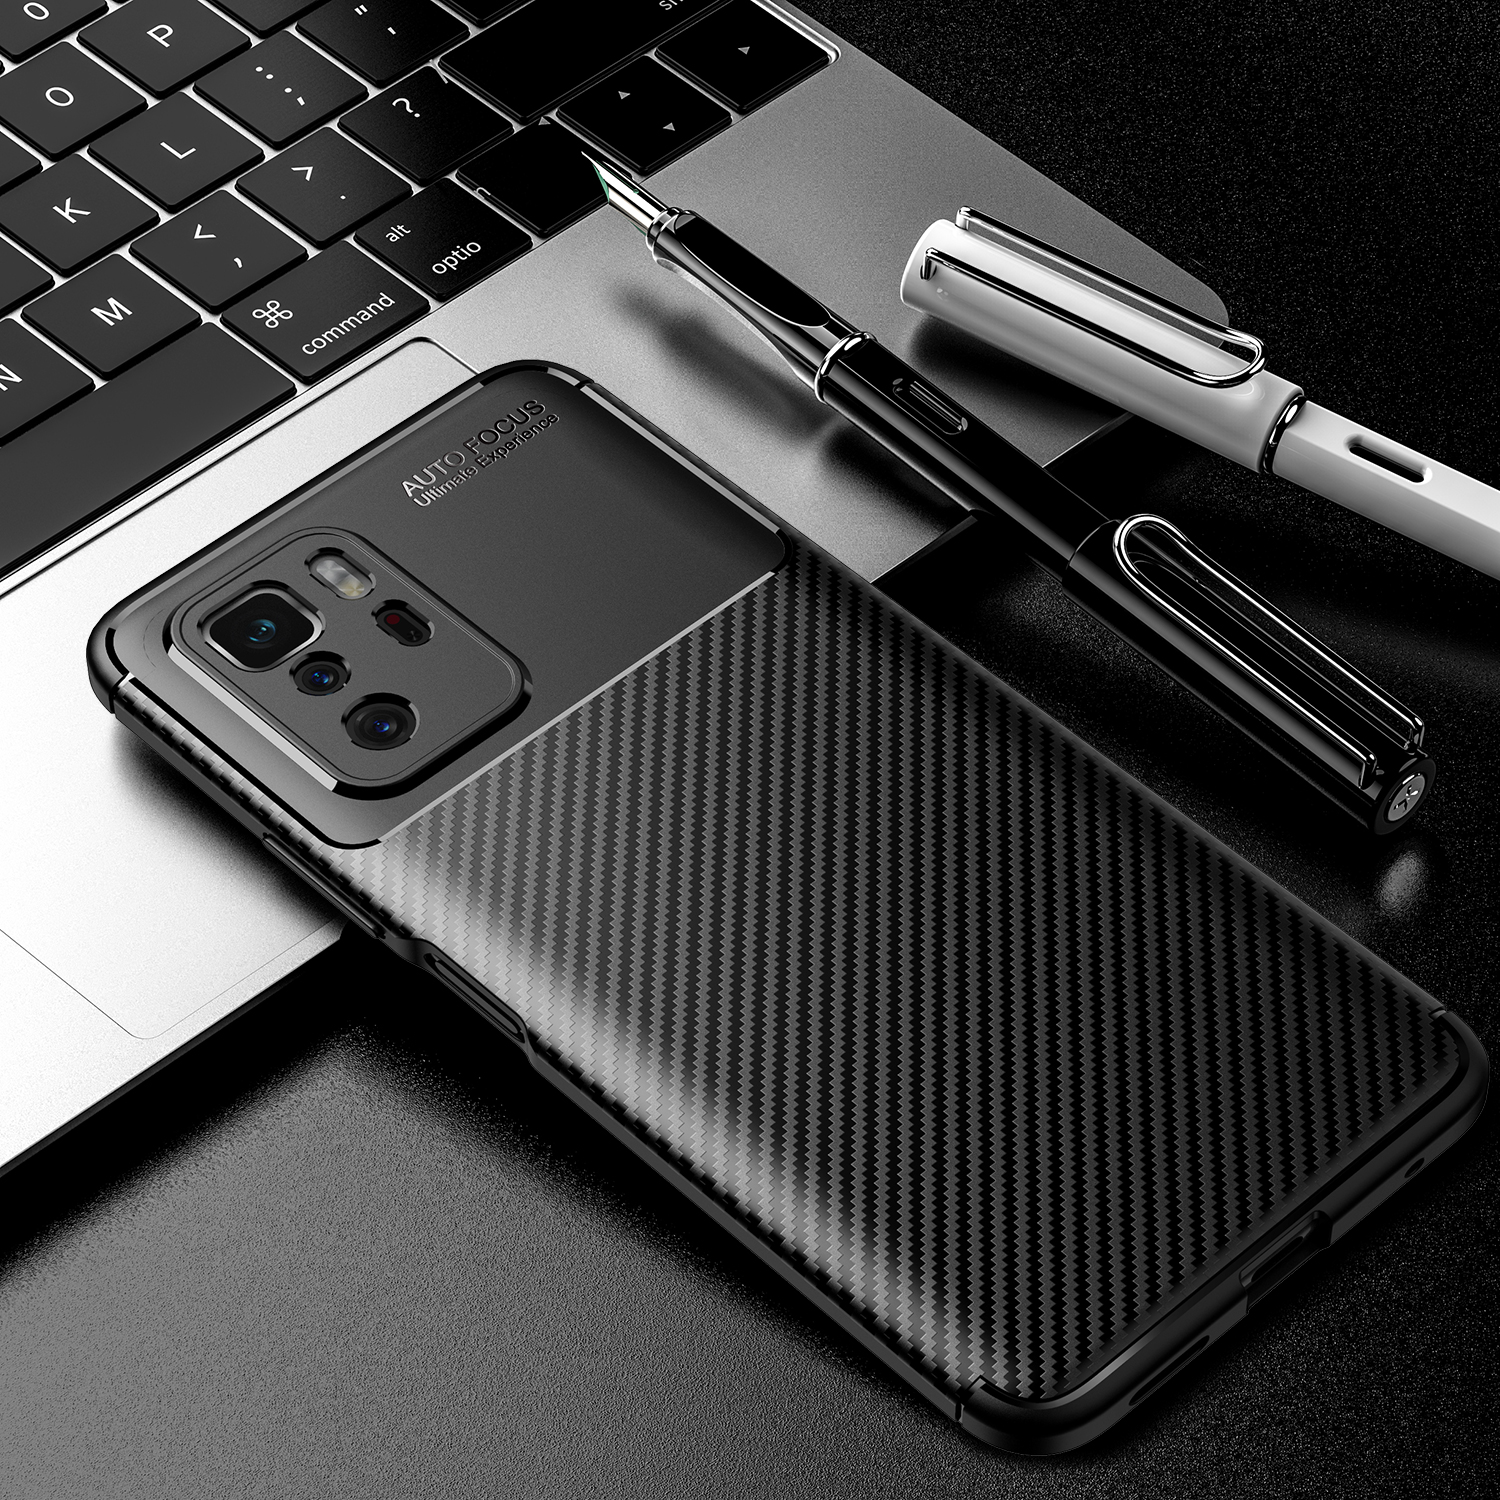 Bakeey-for-Xiaomi-Redmi-Note-10-Pro-5G-Case-Luxury-Carbon-Fiber-Pattern-Shockproof-Silicone-Protecti-1866174-8